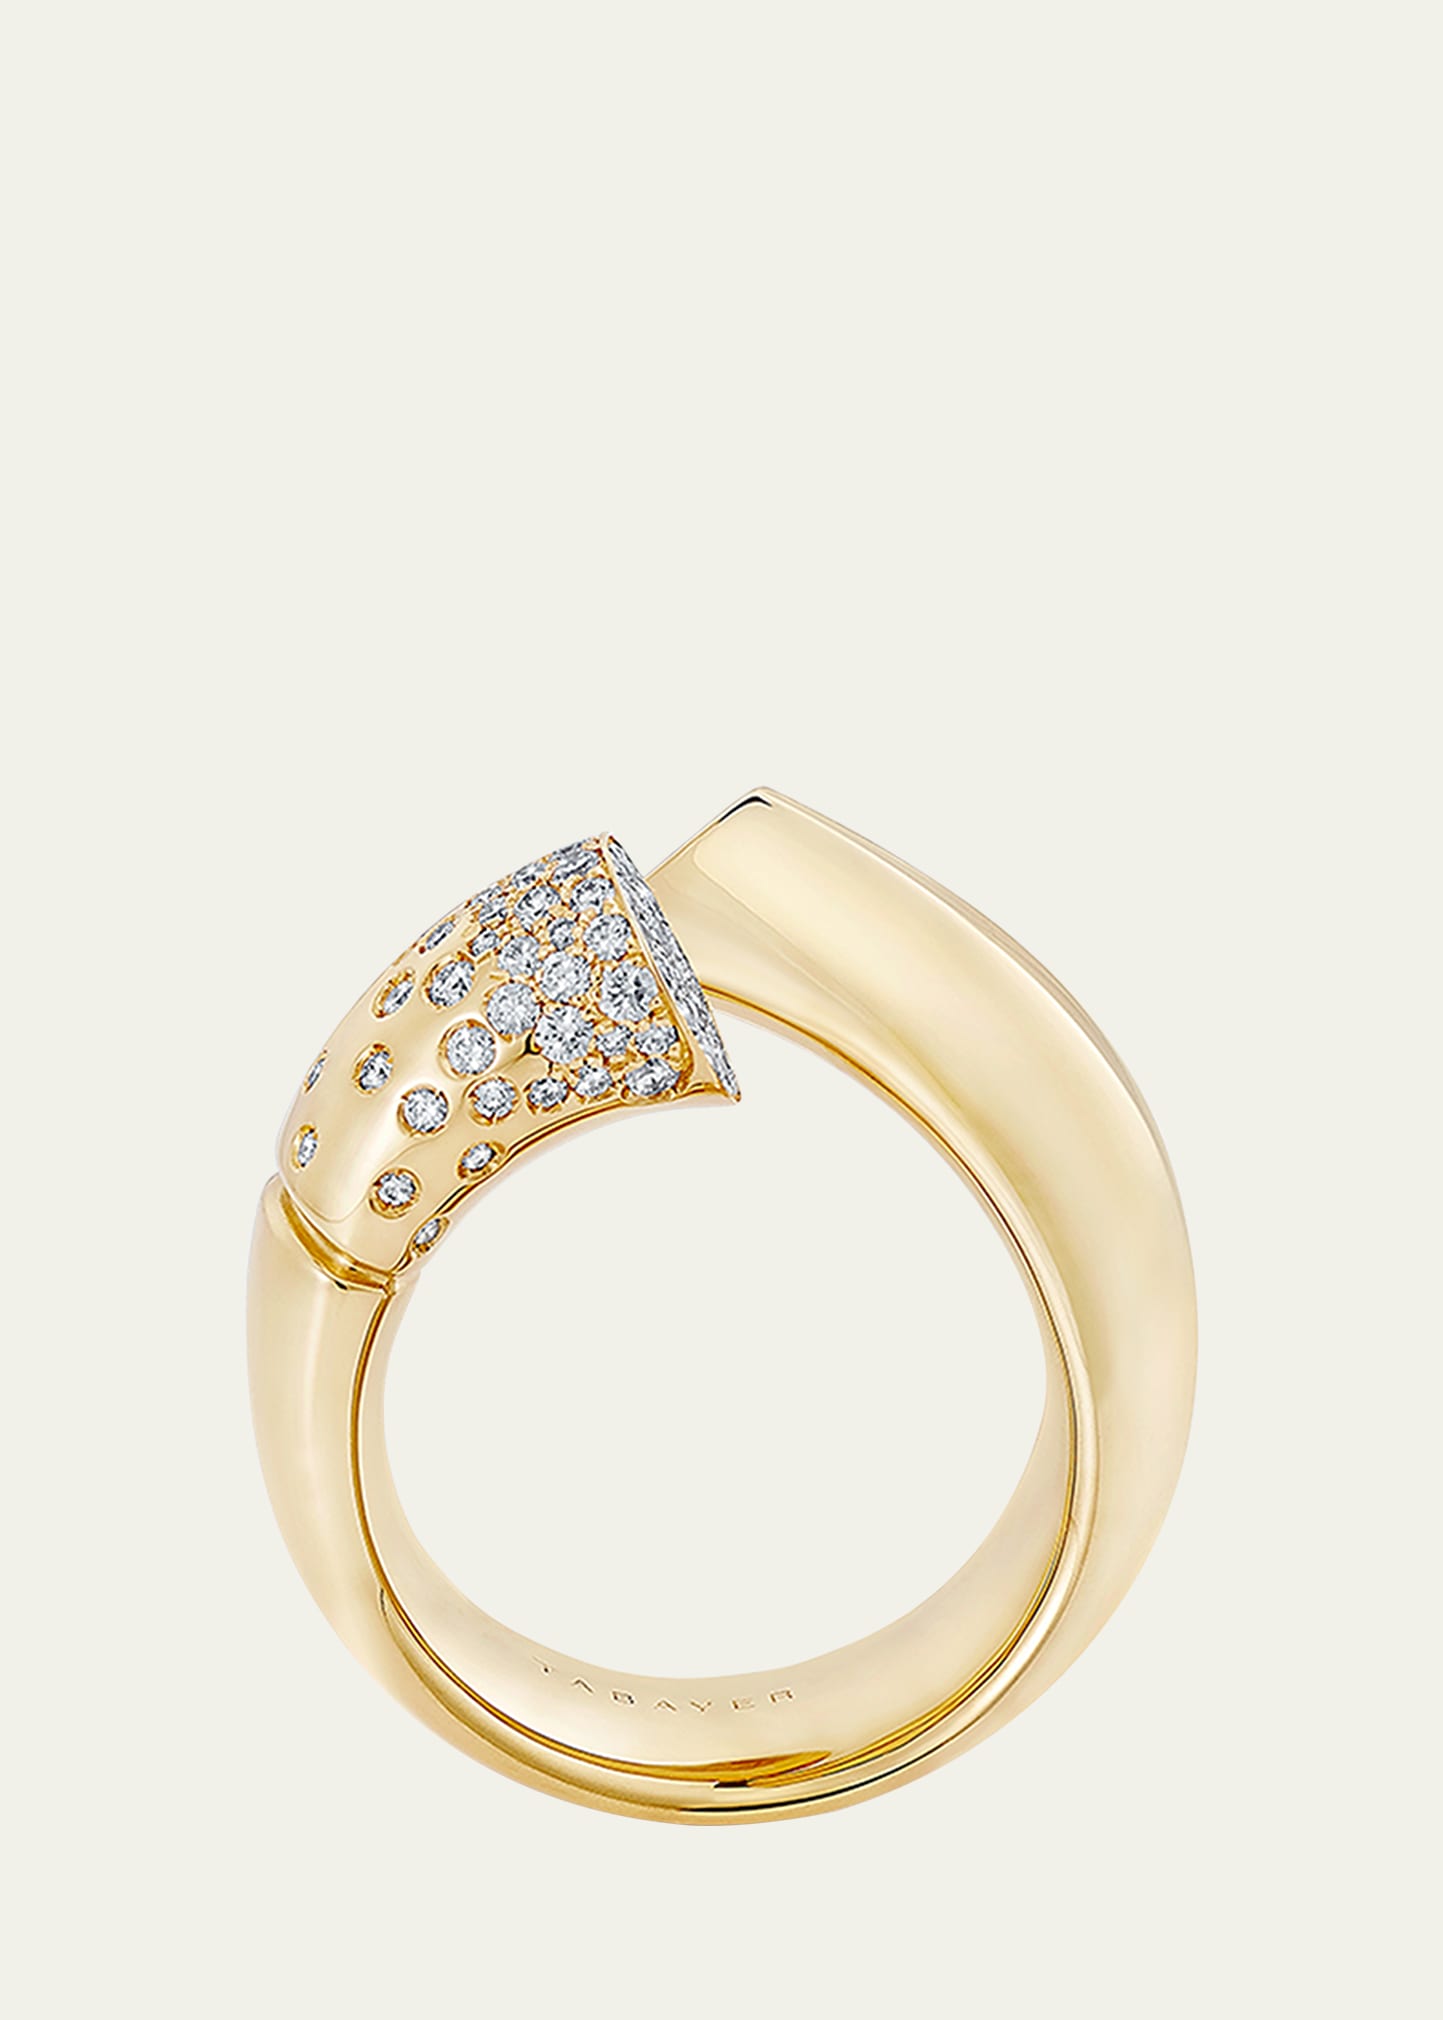 18k Fairmined Yellow Gold Oera Ring with Diamonds, Size 55